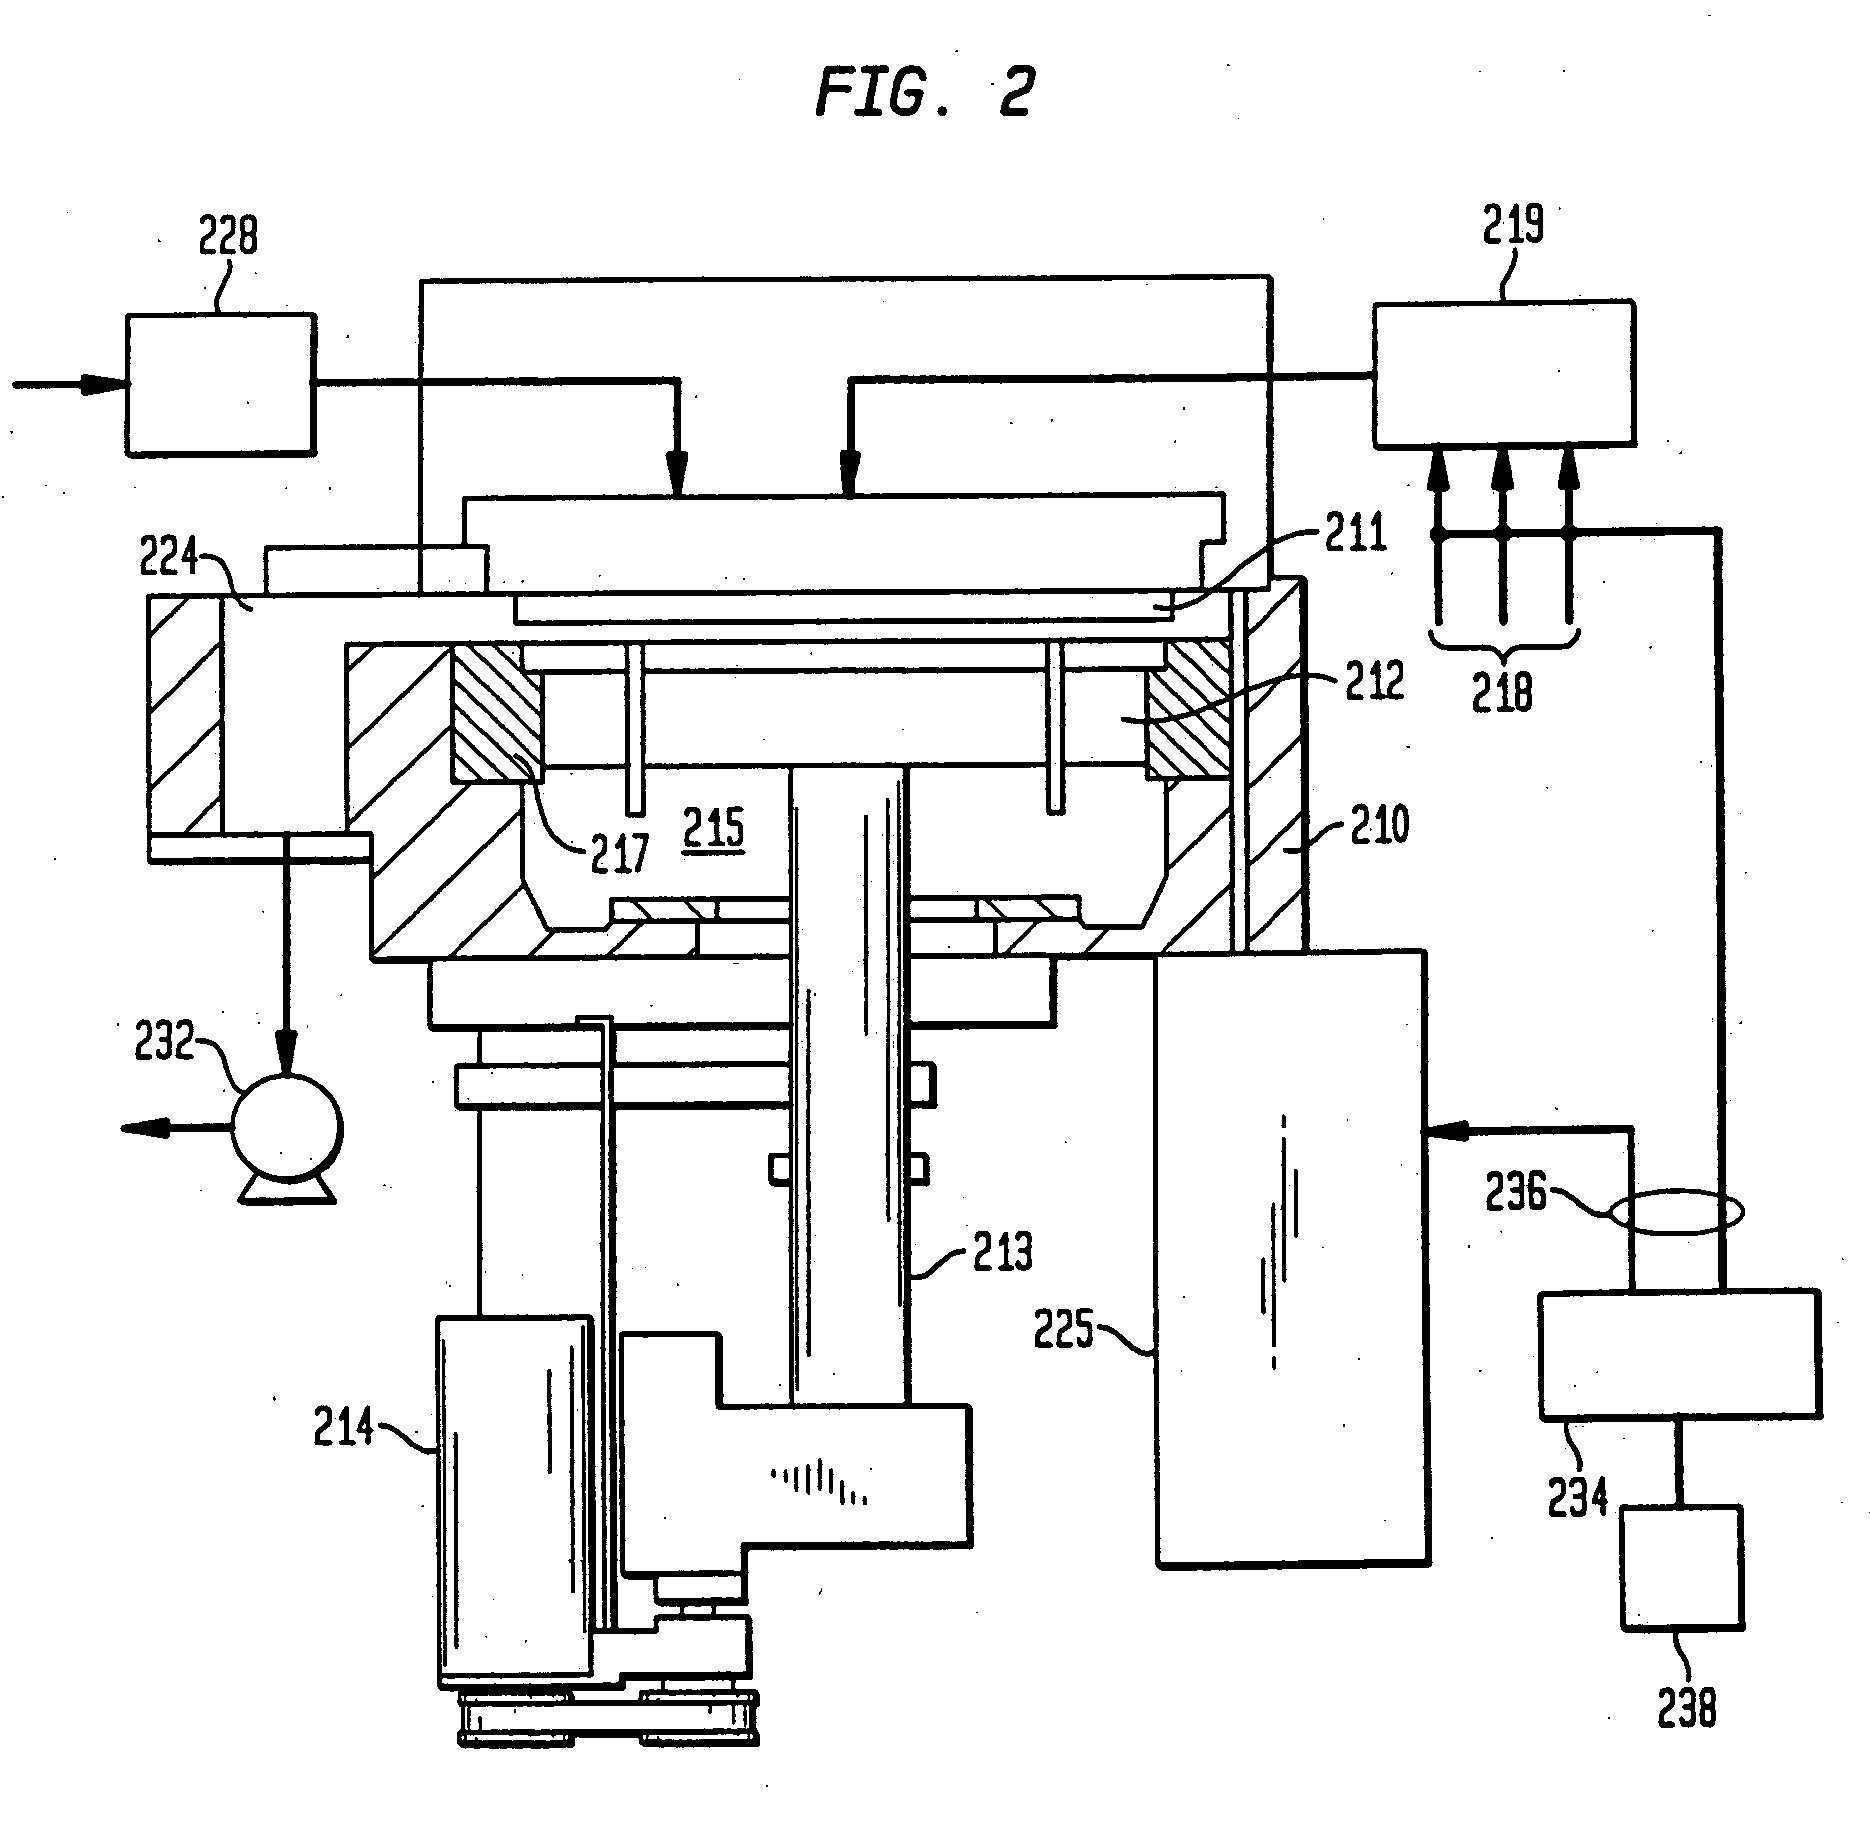 Methods and apparatus for e-beam treatment used to fabricate integrated circuit devices